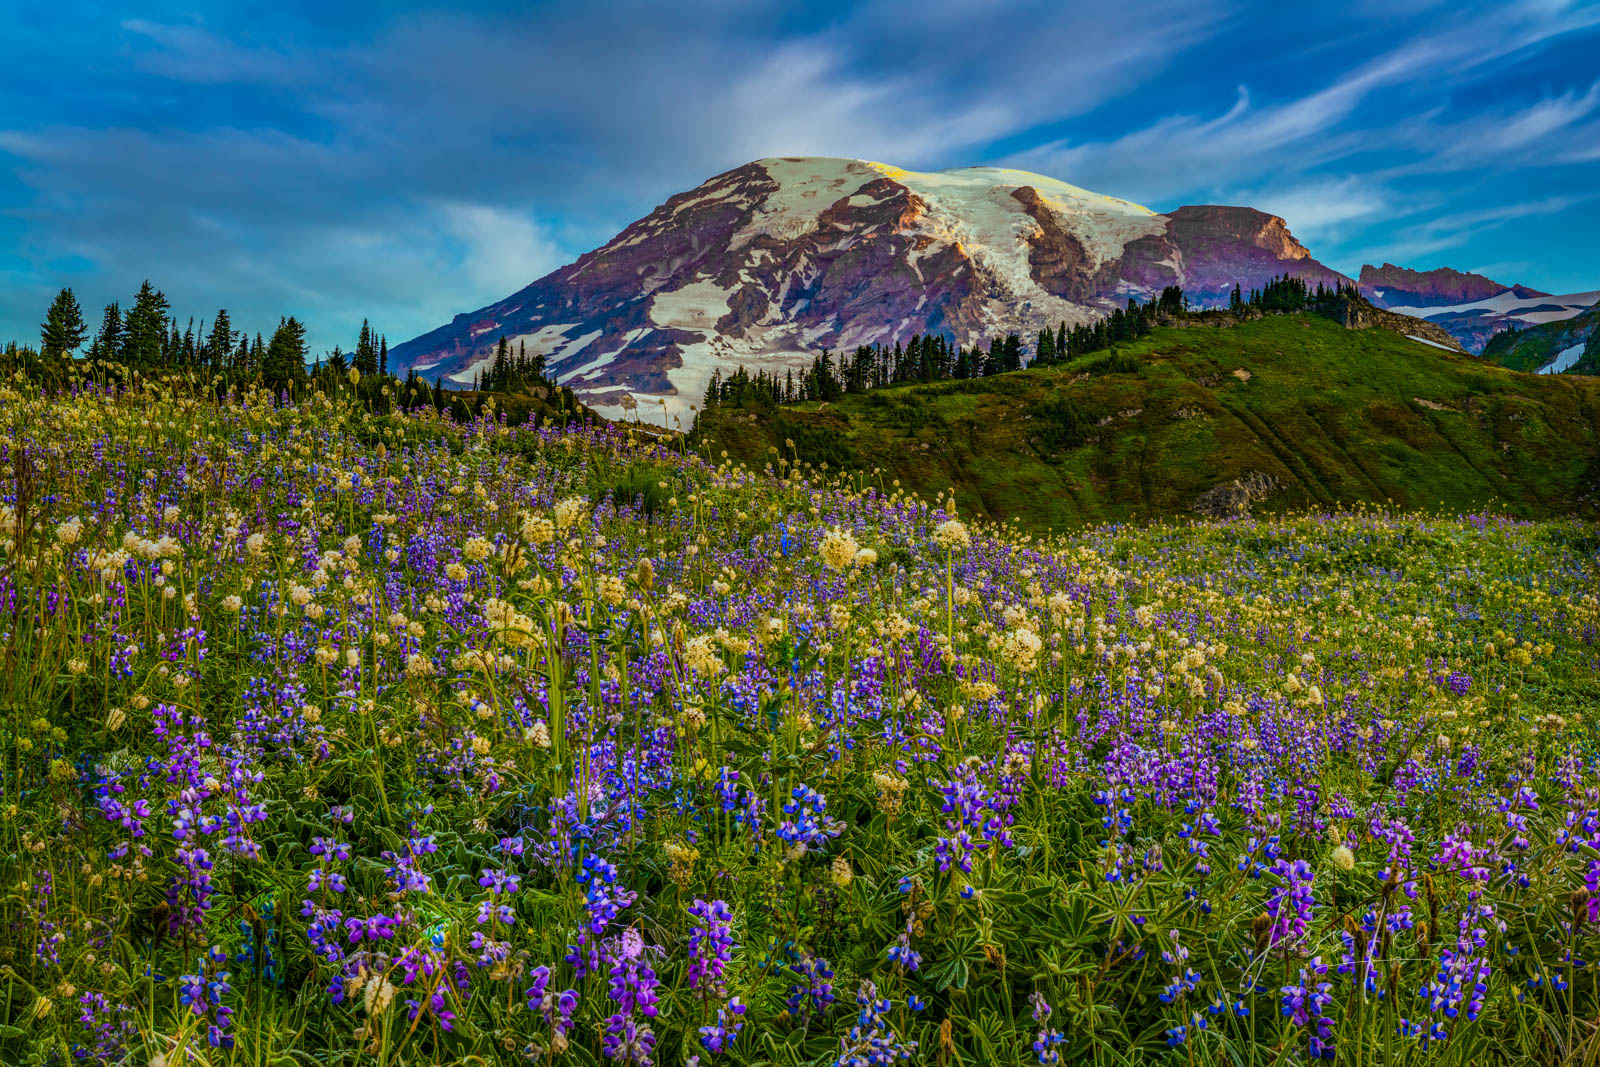 This Purple Paradise makes a beautiful picture of the splendor of Mt. Rainier National Park. Flowered meadows by summer and colors...